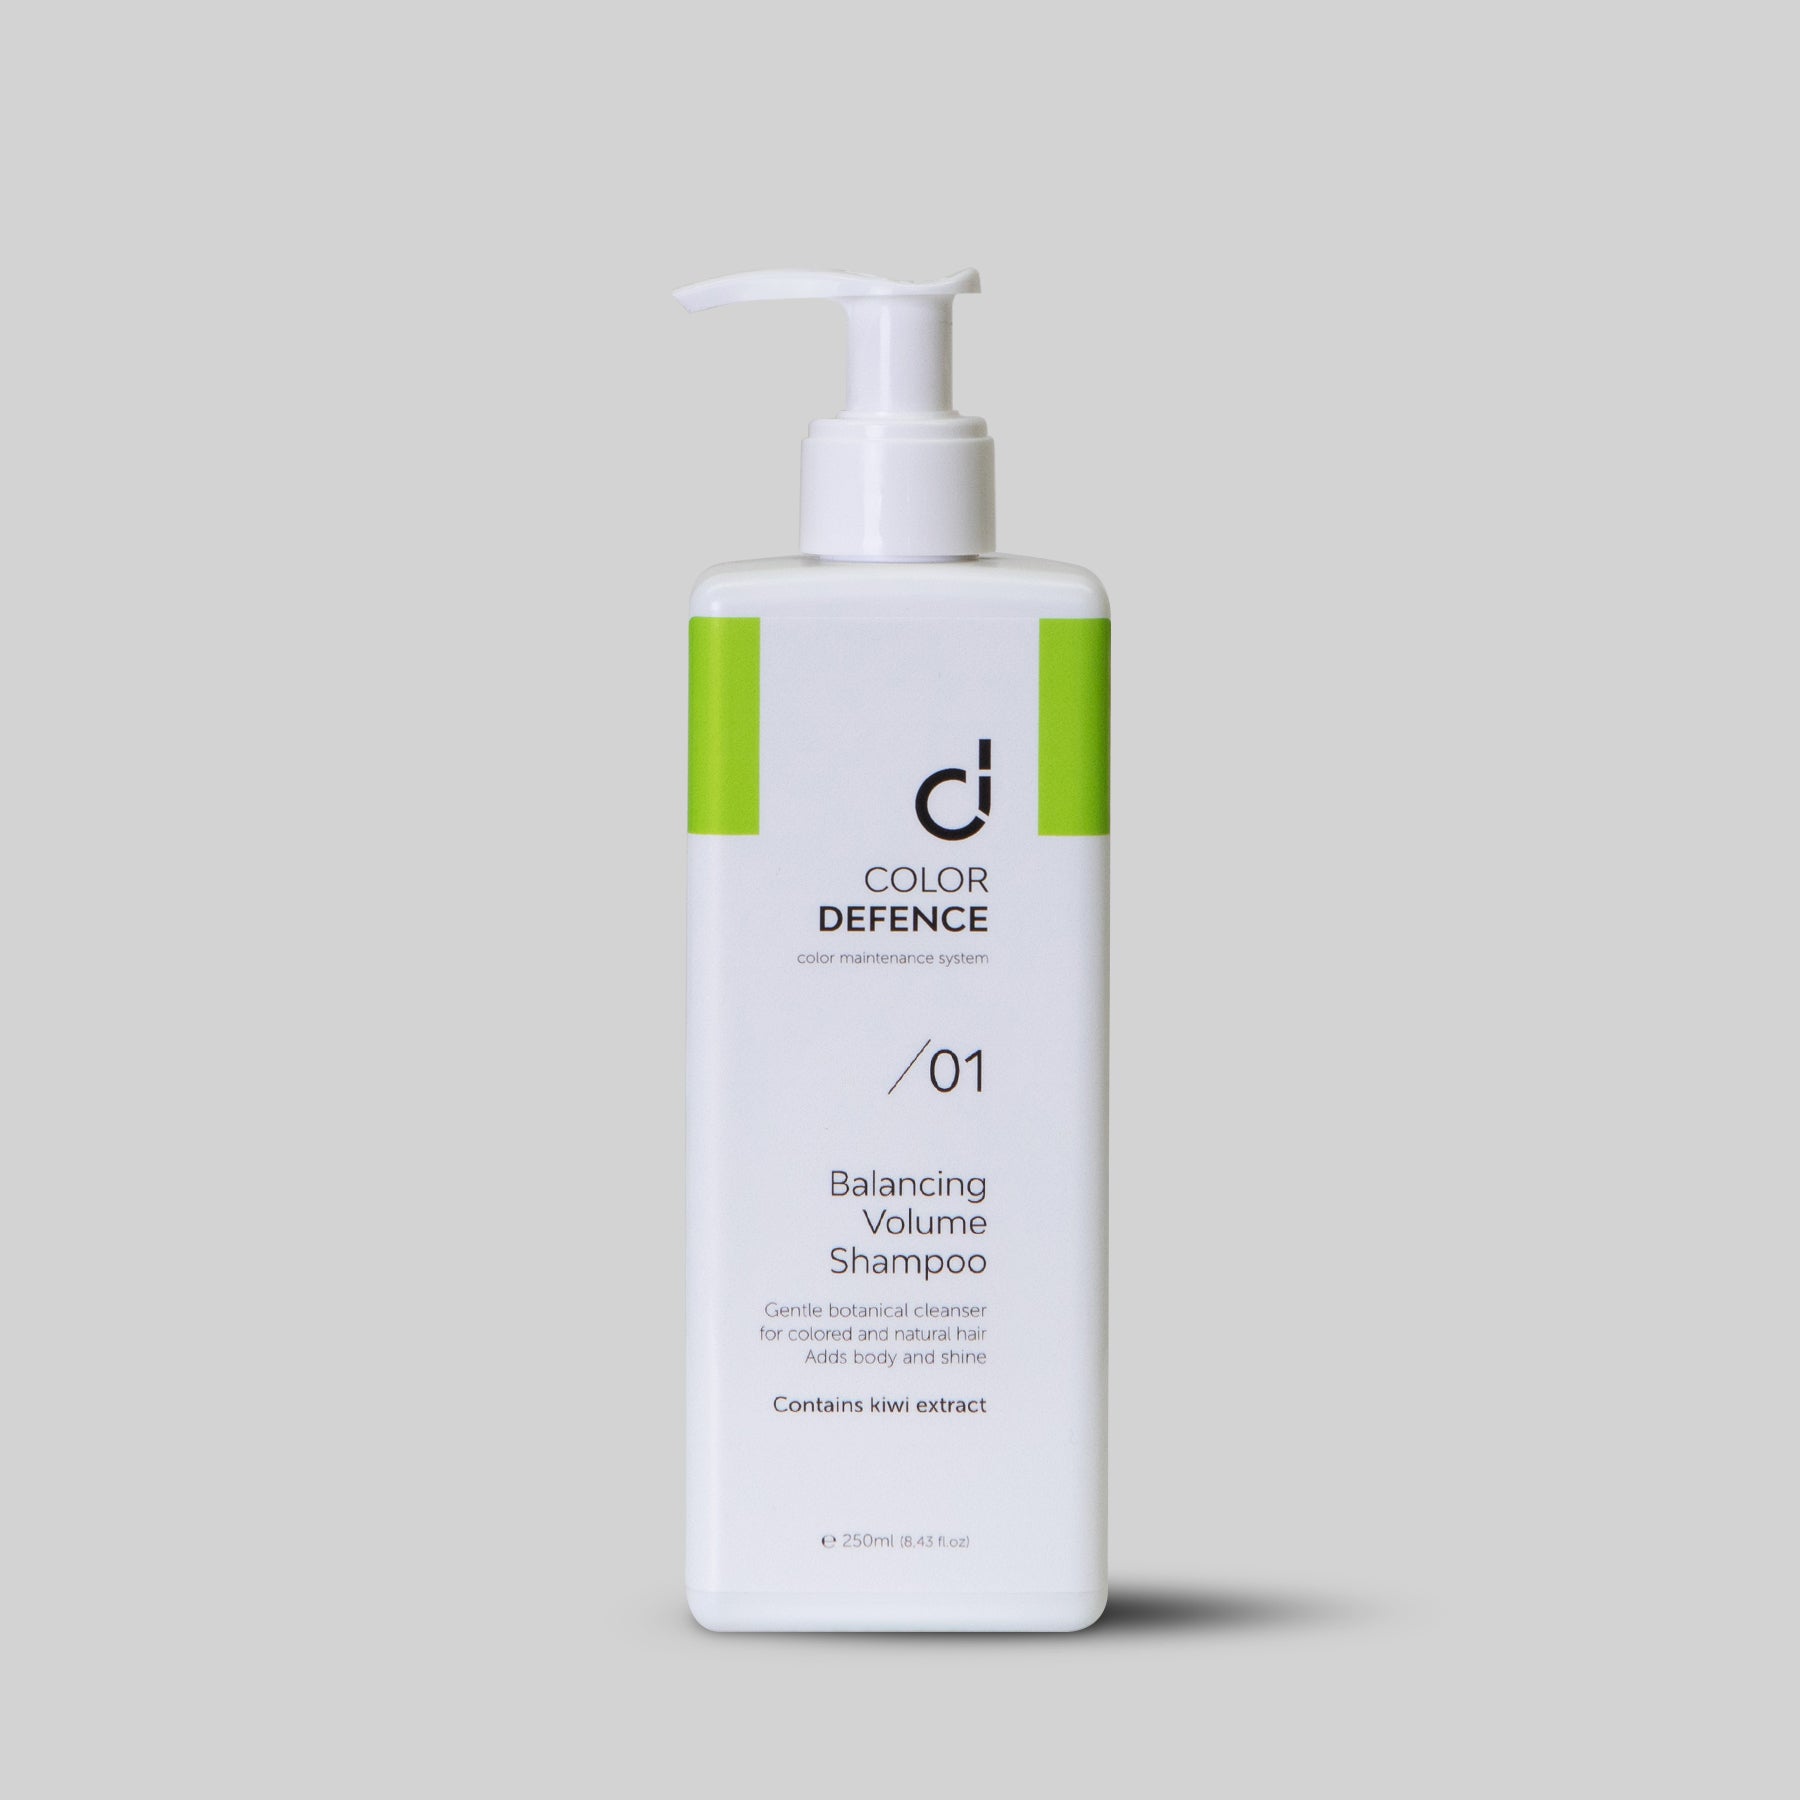 Colour Defence Balancing Volume Shampoo-Cleanses and prepares hair for our 3 step colour maintenance system. A gentle daily shampoo for natural & fine hair. Reduces oxidation, protects against free radical and environmental damage. A gentle botanical cleanser that adds body and shine.  Contains Kiwi Extract & Vitamin E. 1234